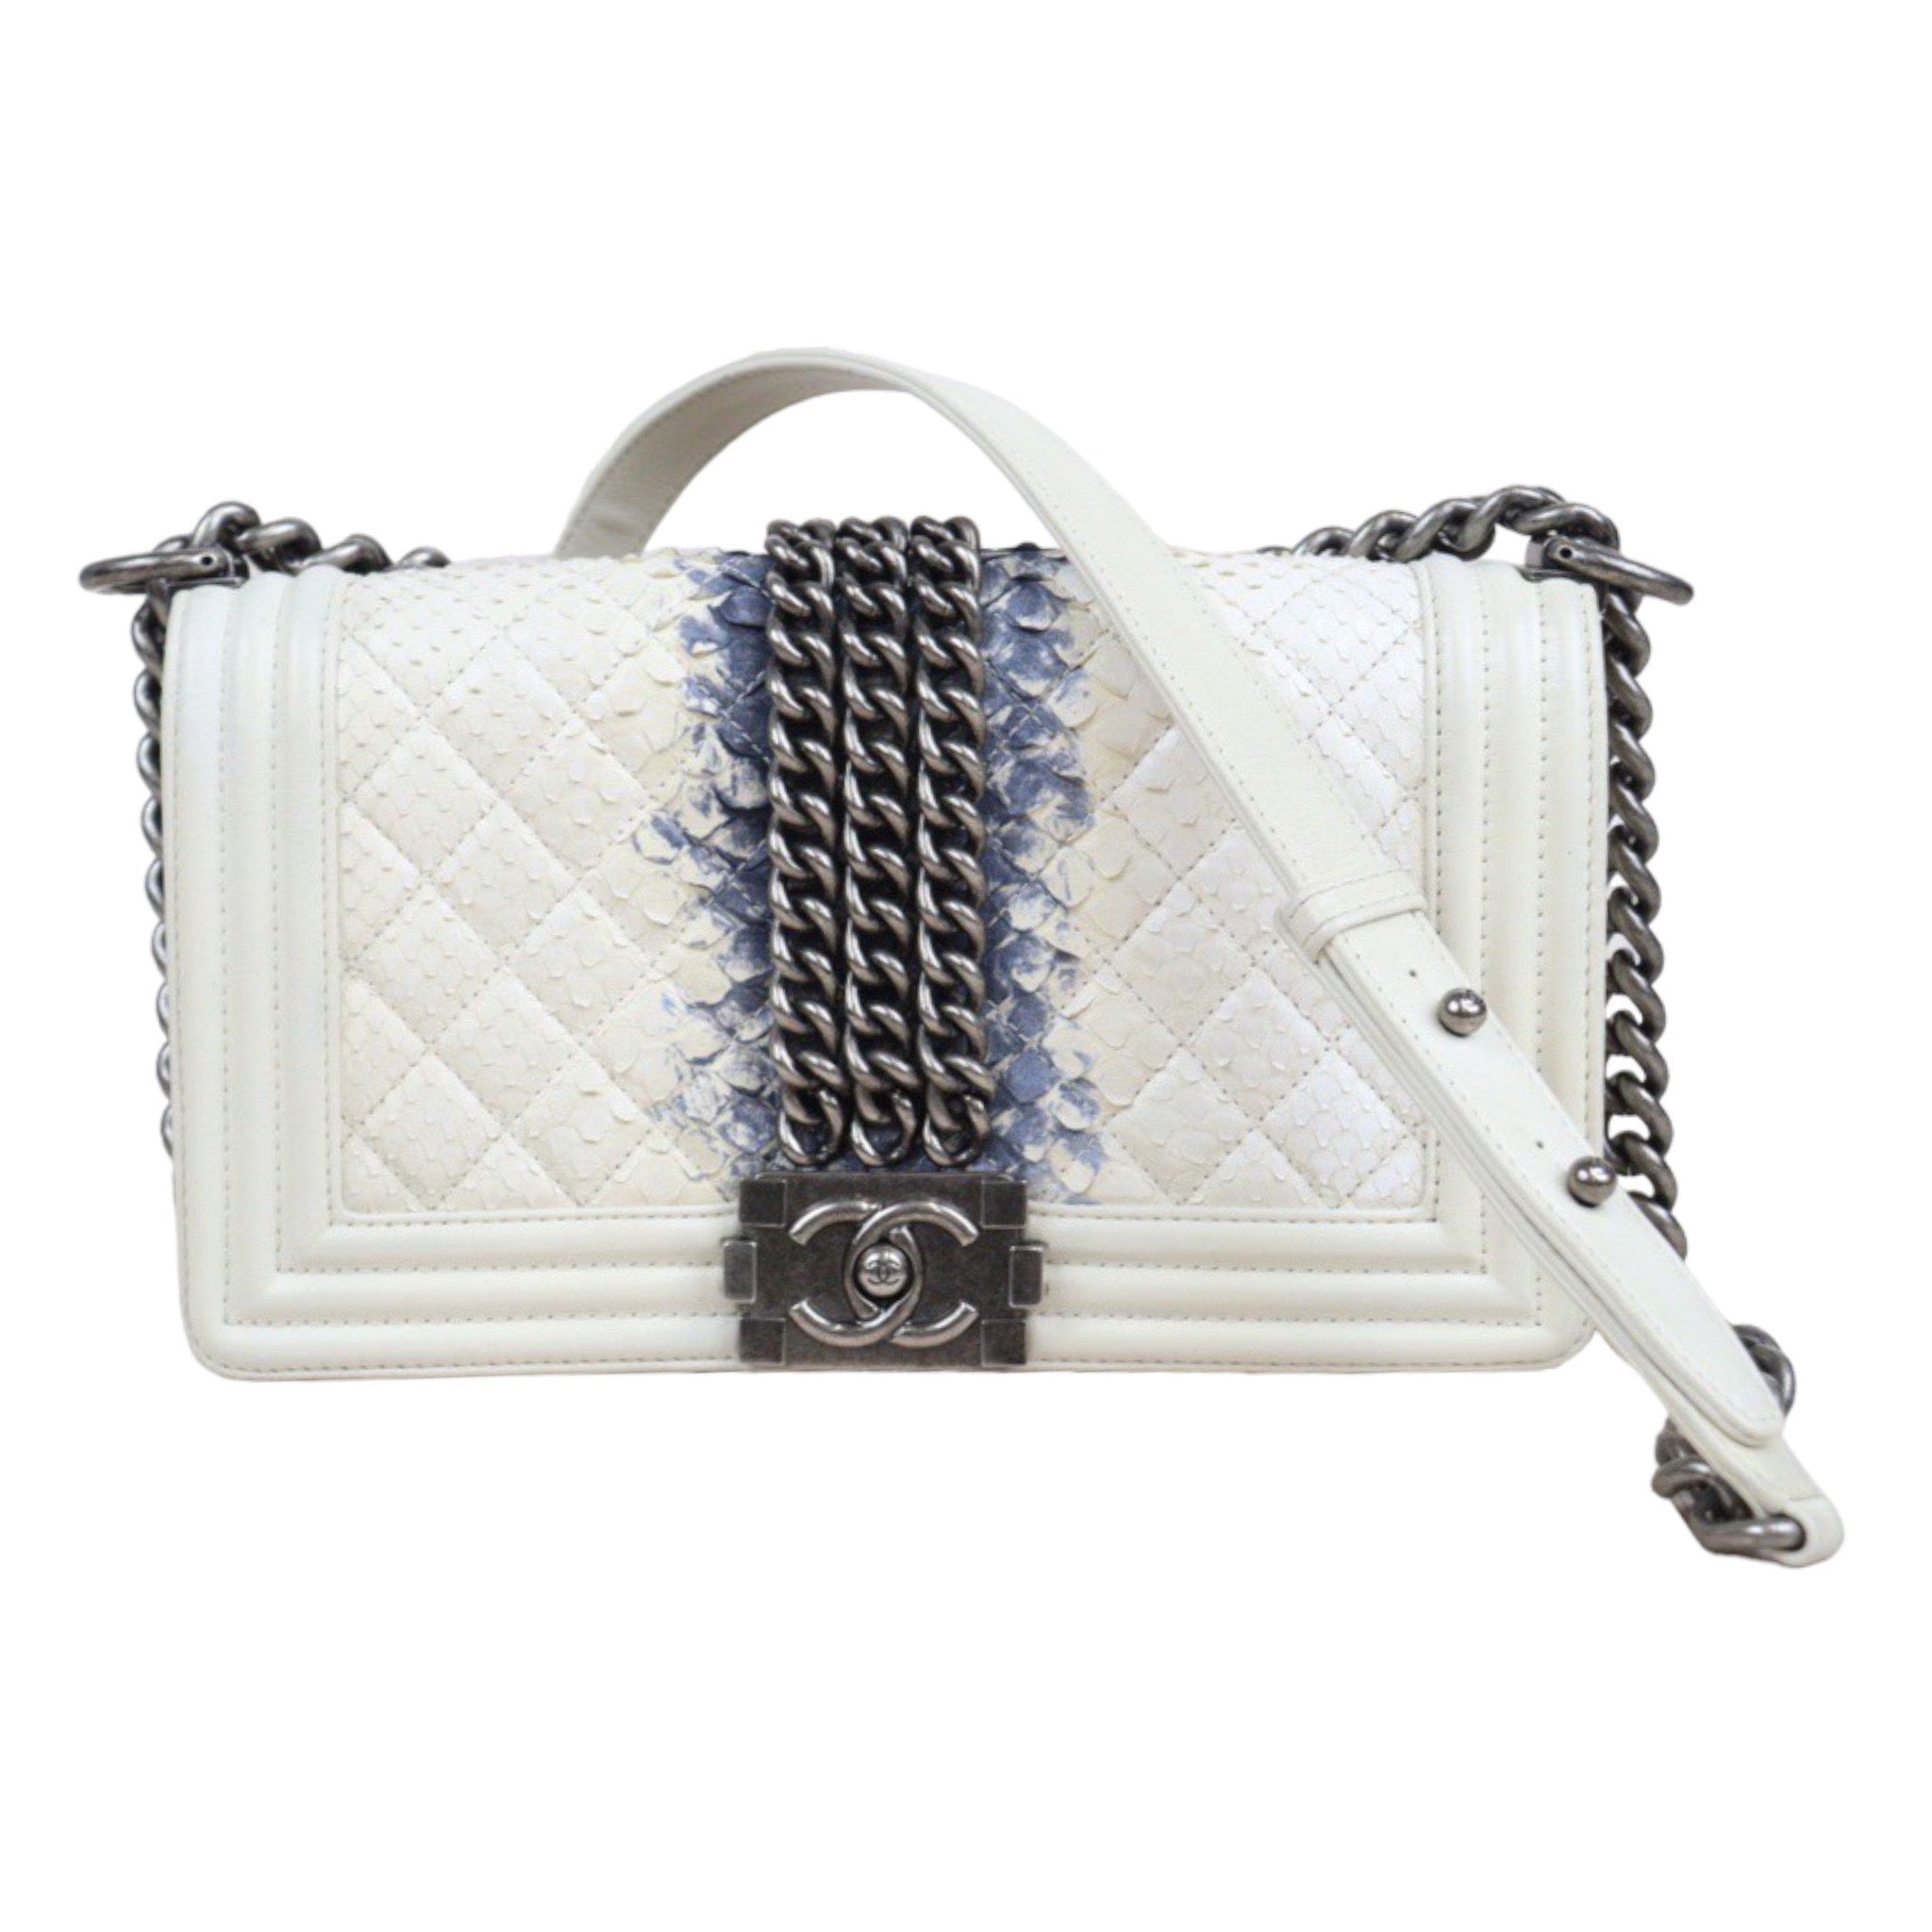 Chanel, Pre-Loved White Calfskin Top Handle Flap Bag, White